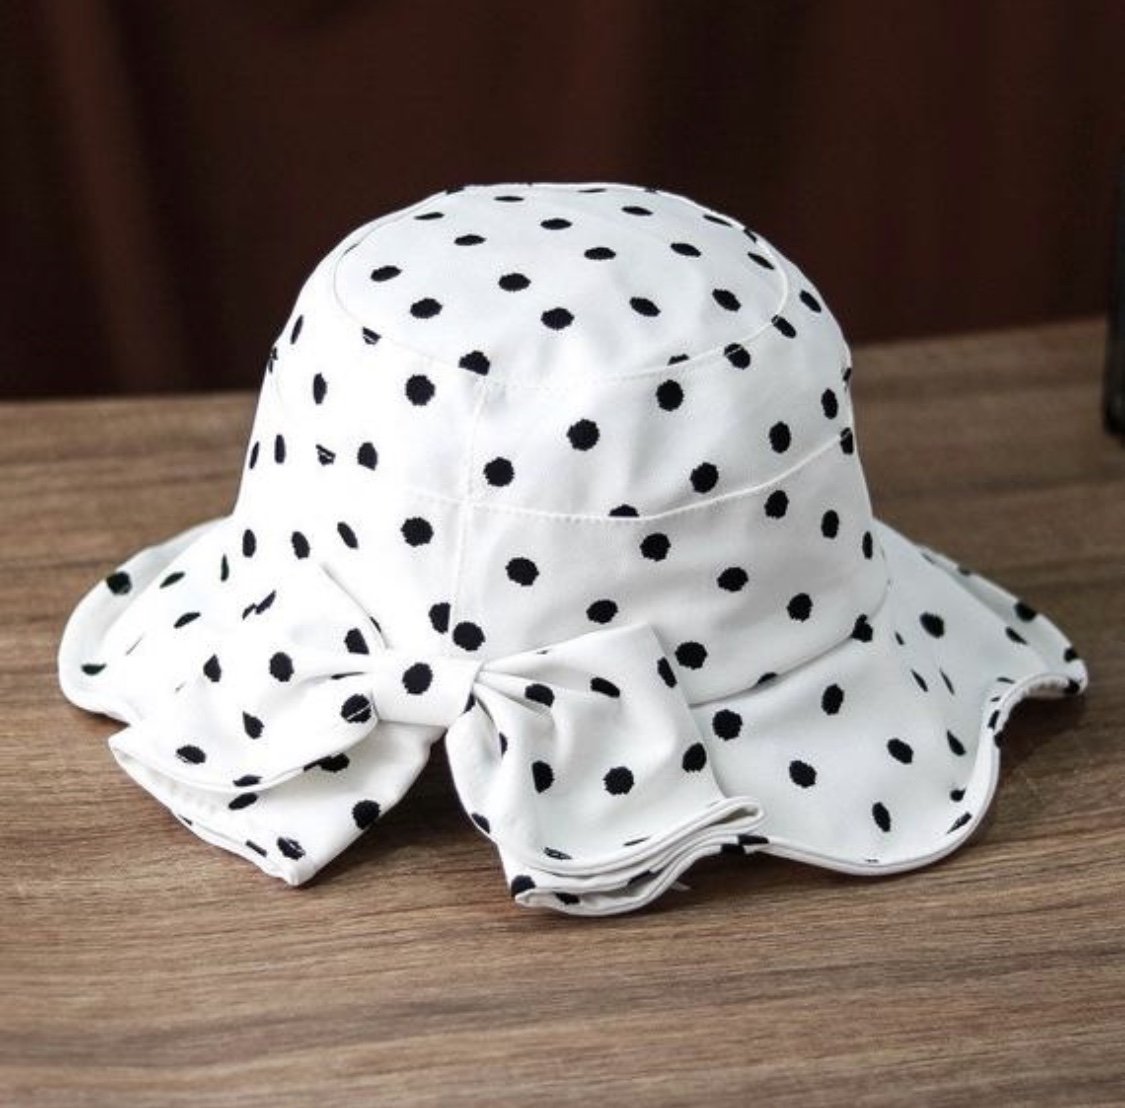 Dot Print Bucket Hat for Women and Girls.